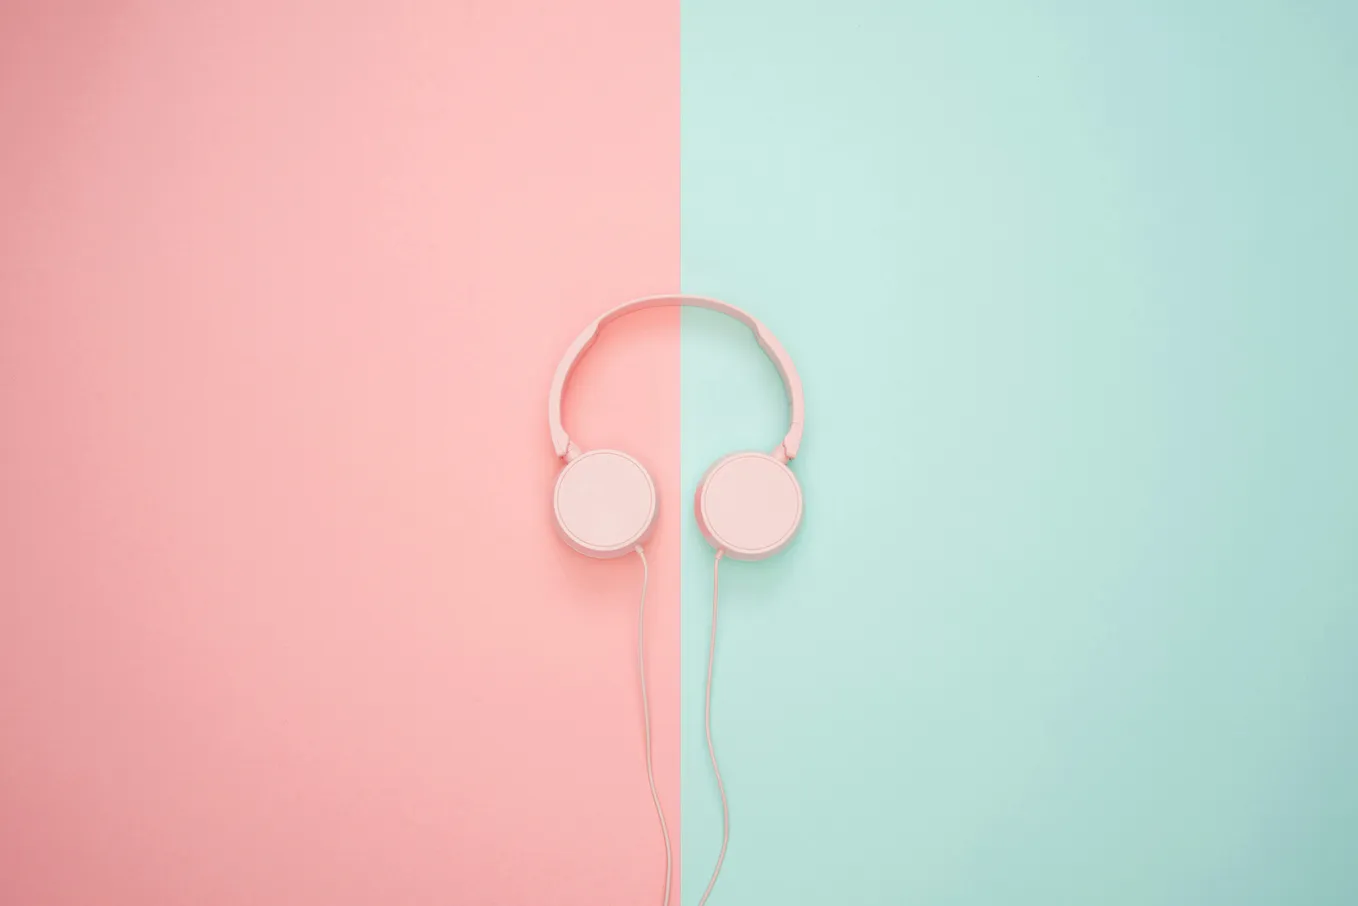 A pair of headphones against a pink and blue background split in half